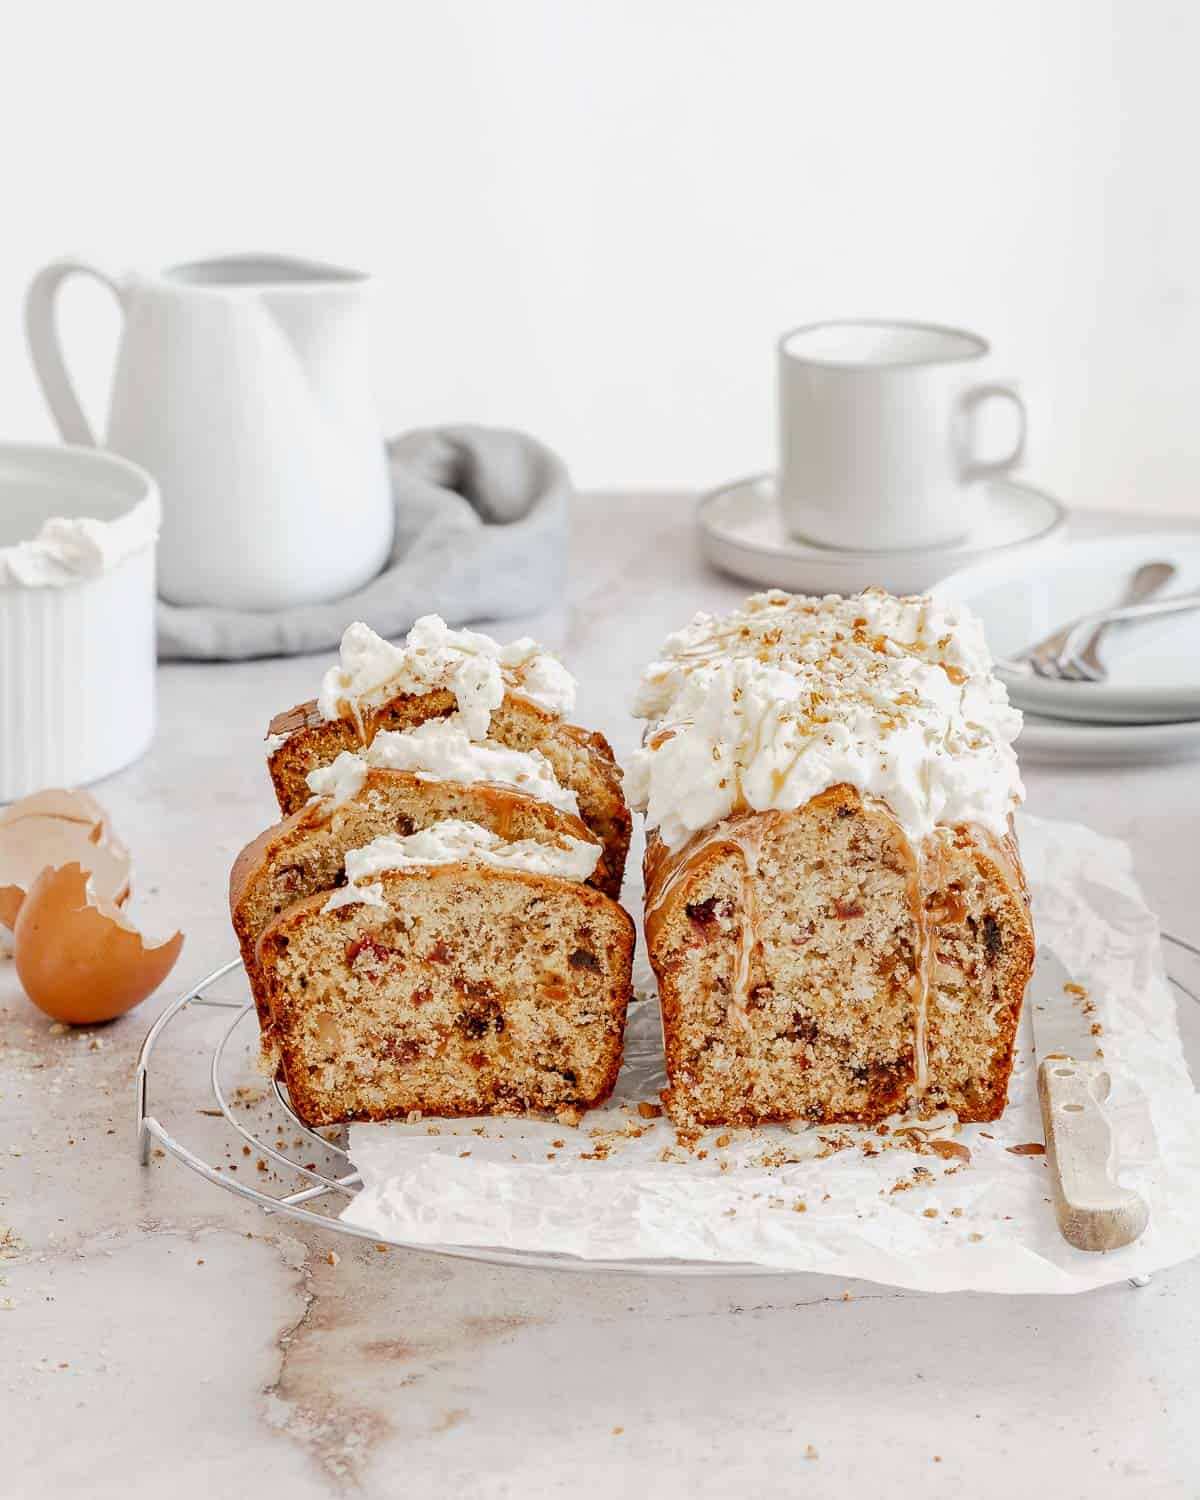 A-Dried Fruits Loaf with Walnuts and Almonds-on-a-tray-with-parchment-paper-the-loaf-has-fresh-whipped-cream-and-caramel-on-top- it-is-sliced-showing-the-dired-fruits-inside-